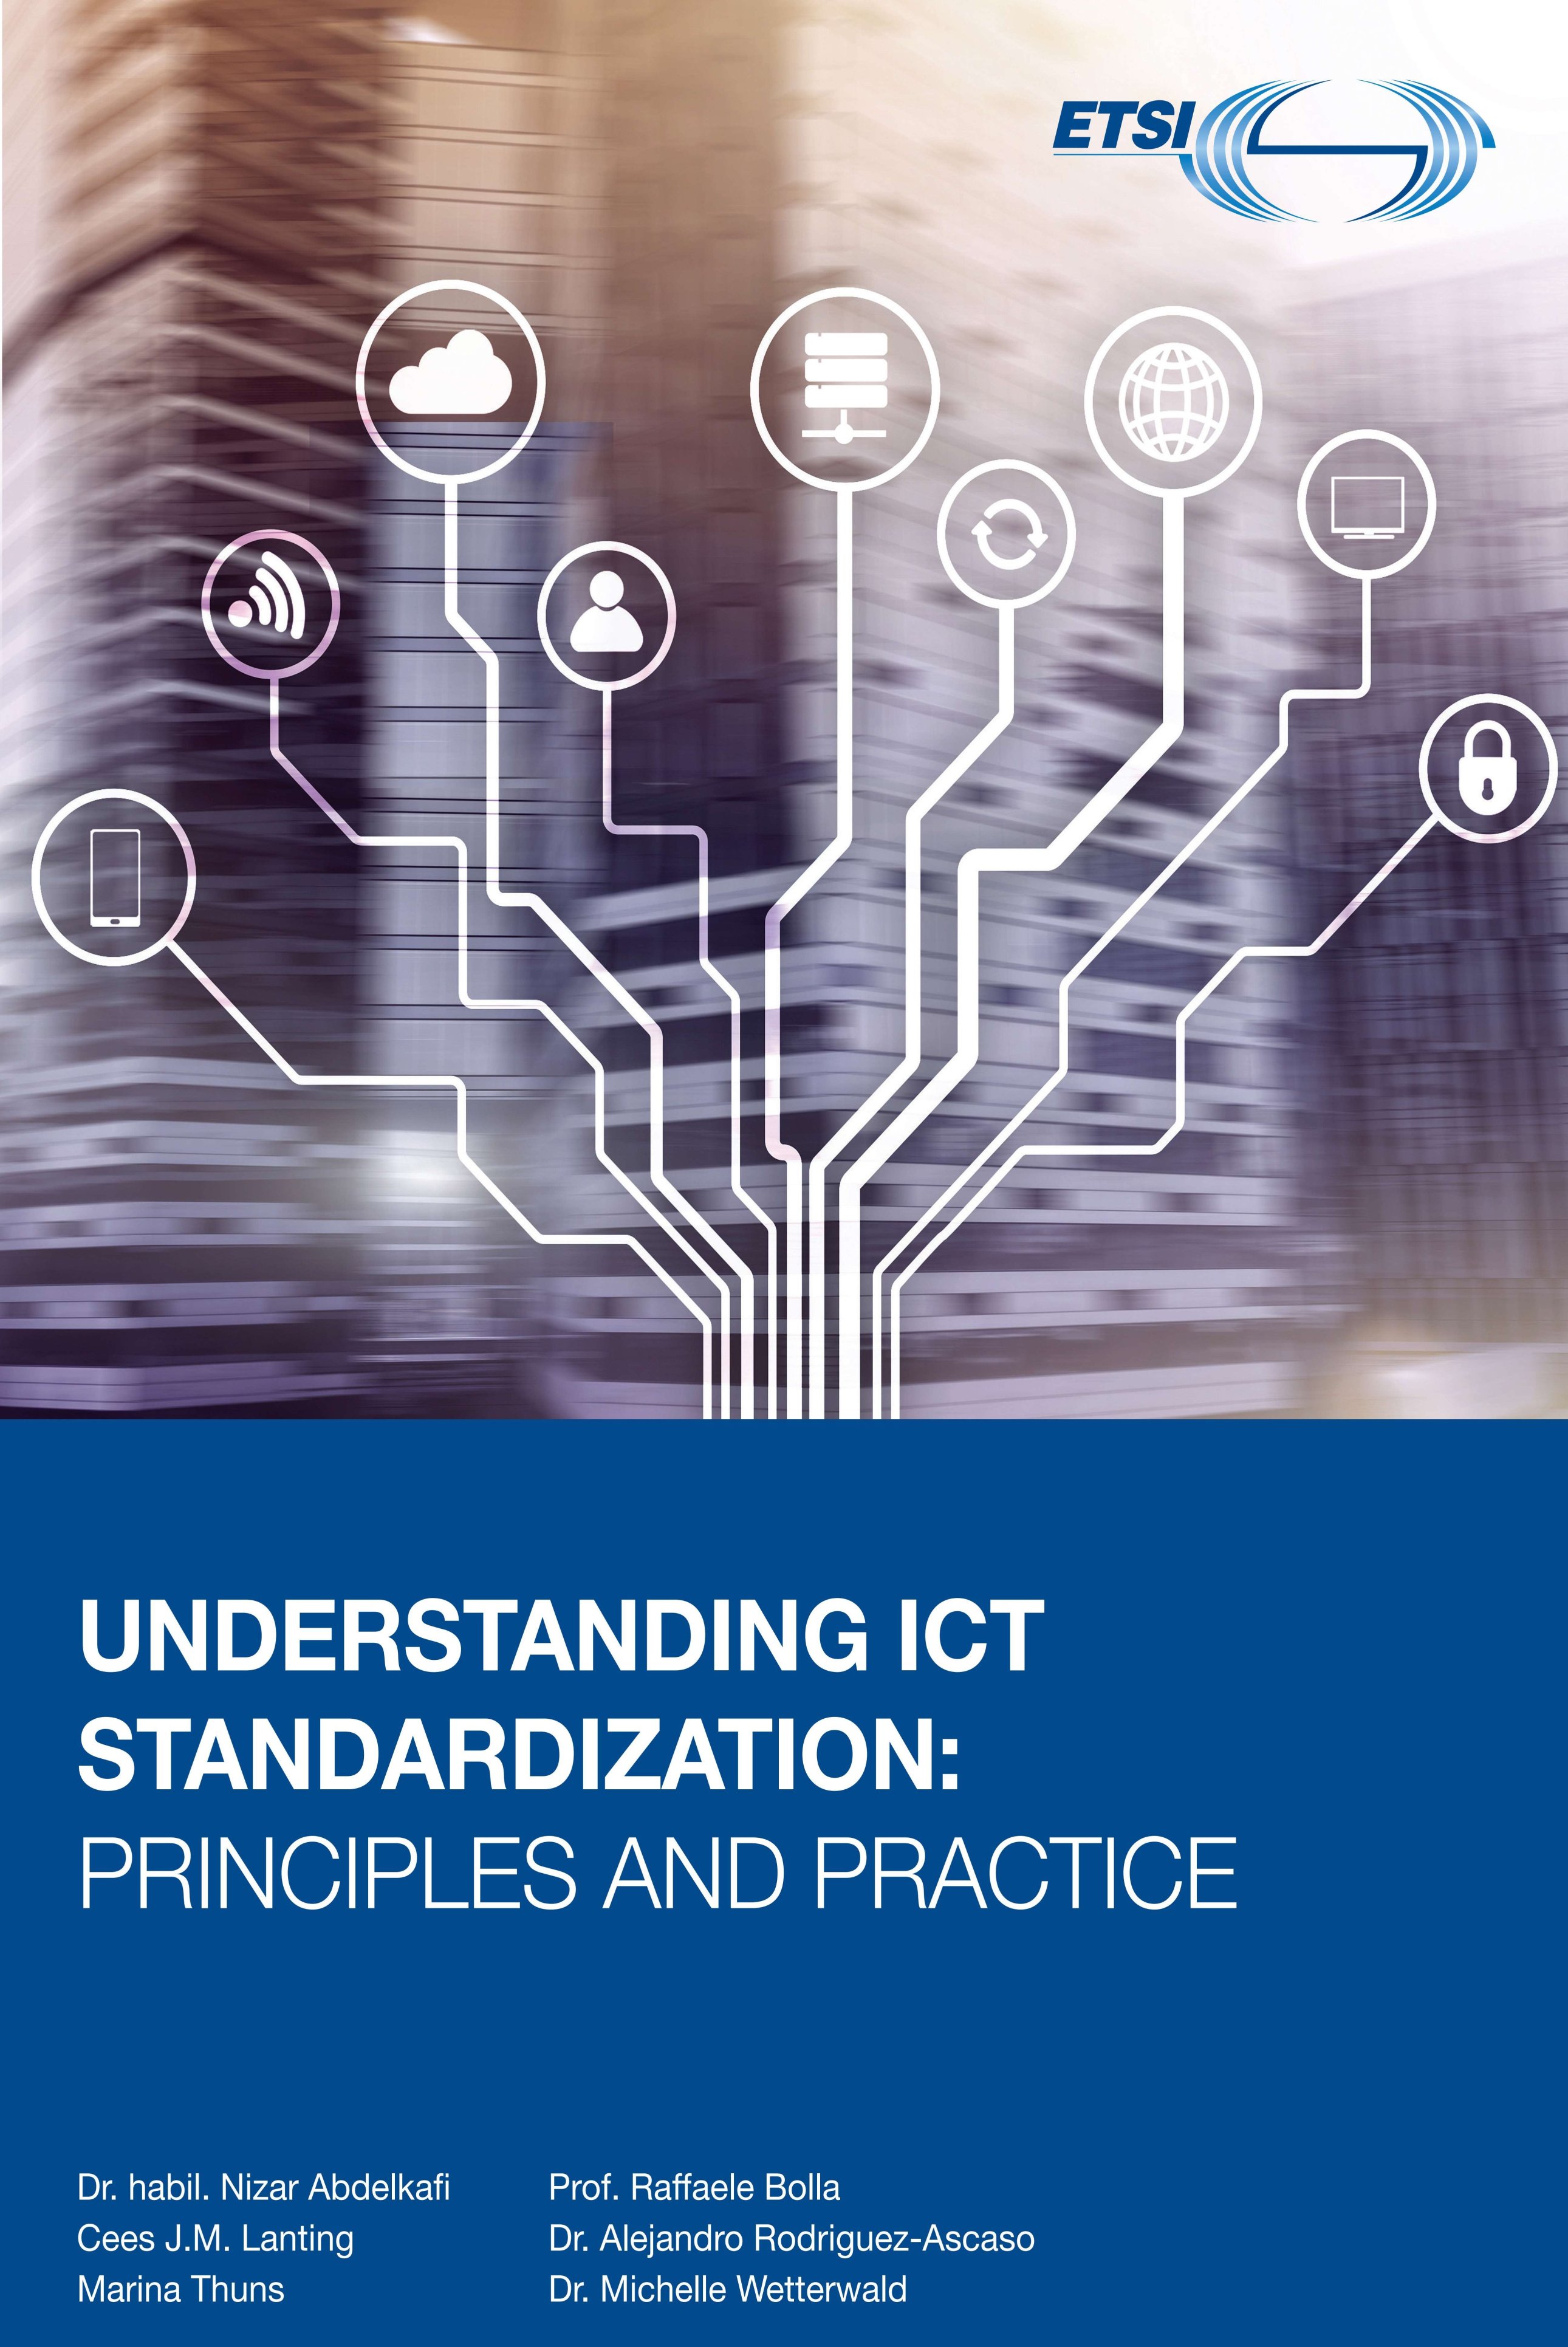 Understanding ICT Standardization: Principles and Practice - Accessible textbook for students